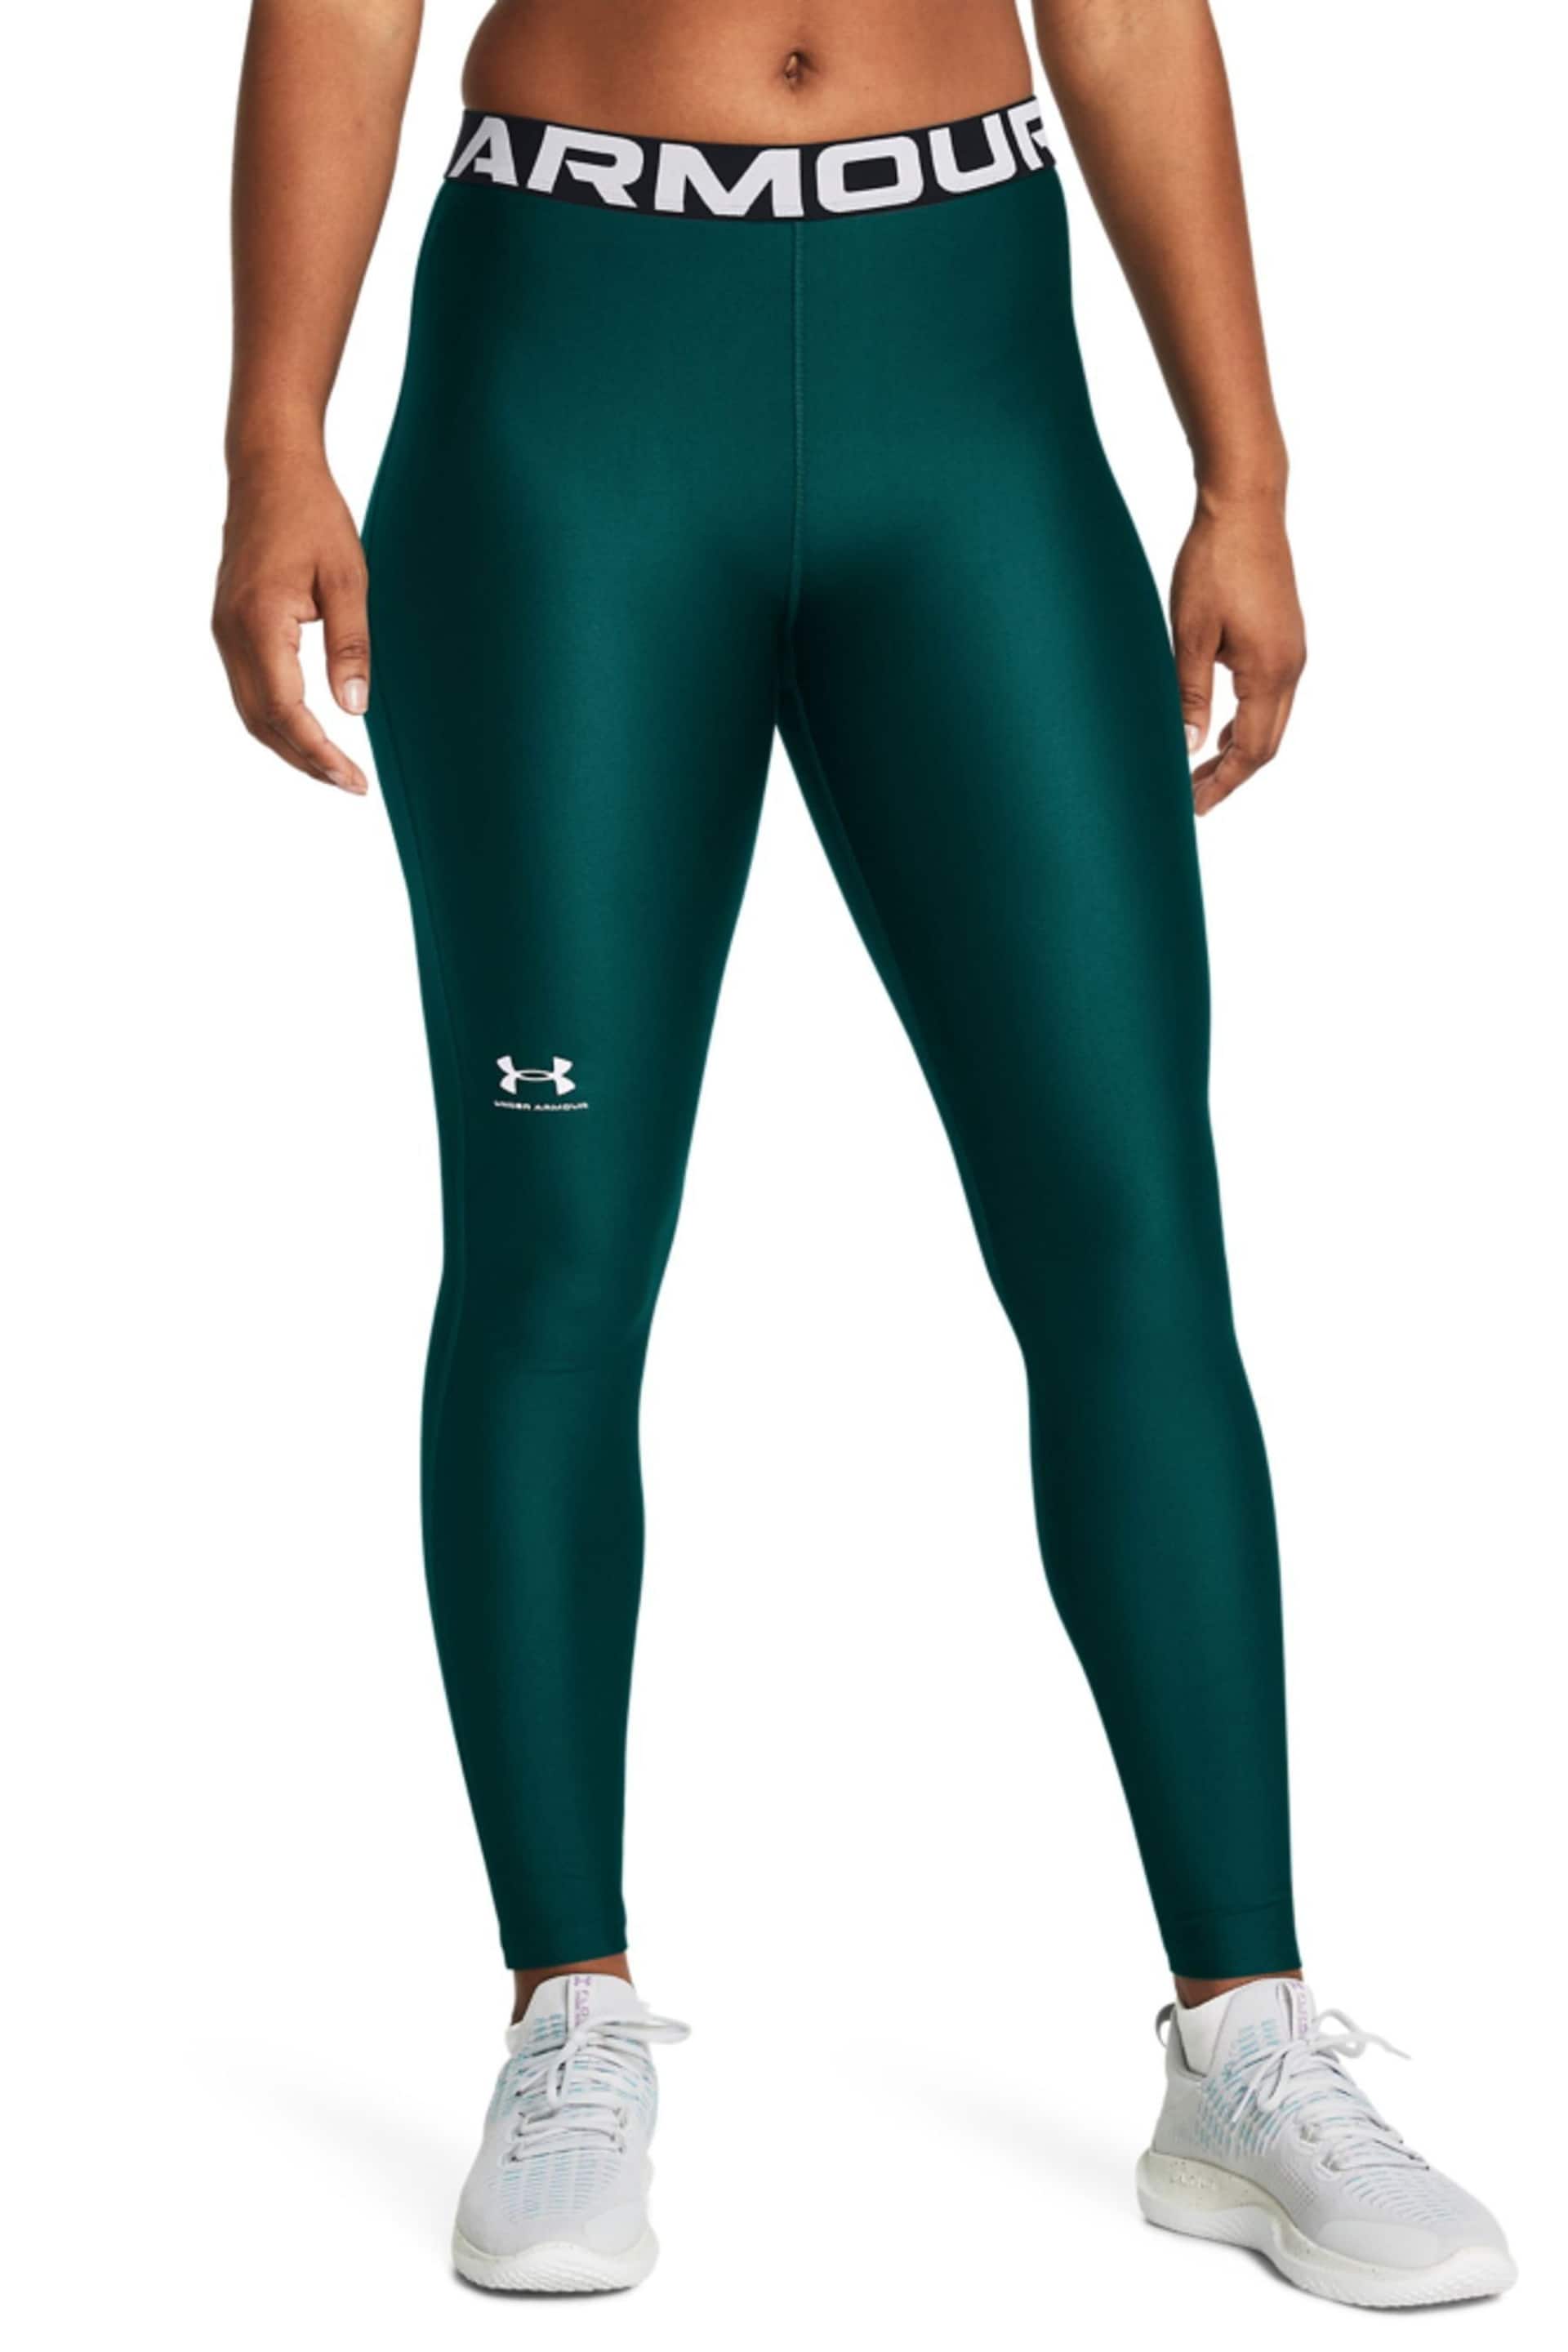 Under Armour Green Womens Heat Gear Authentics Leggings - Image 1 of 8